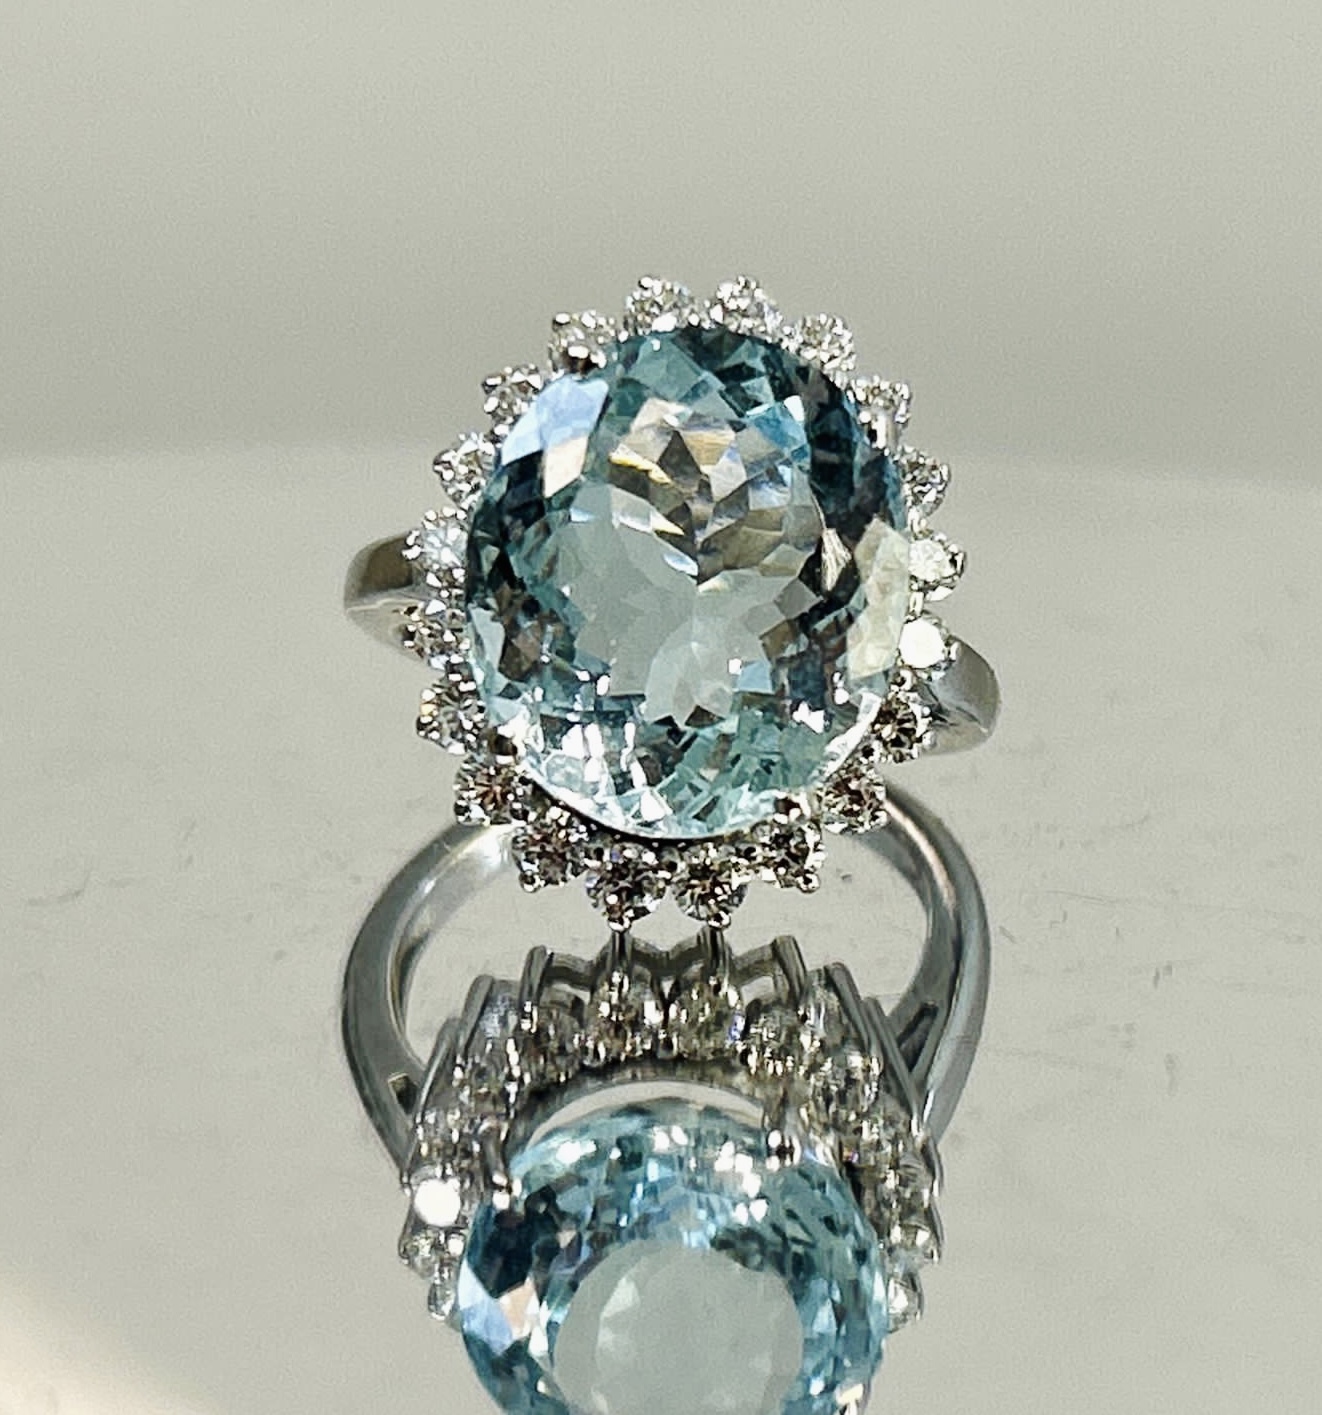 Beautiful Natural Flawless 7.30 CT Aquamarine Ring With Diamonds and 18k Gold - Image 4 of 7